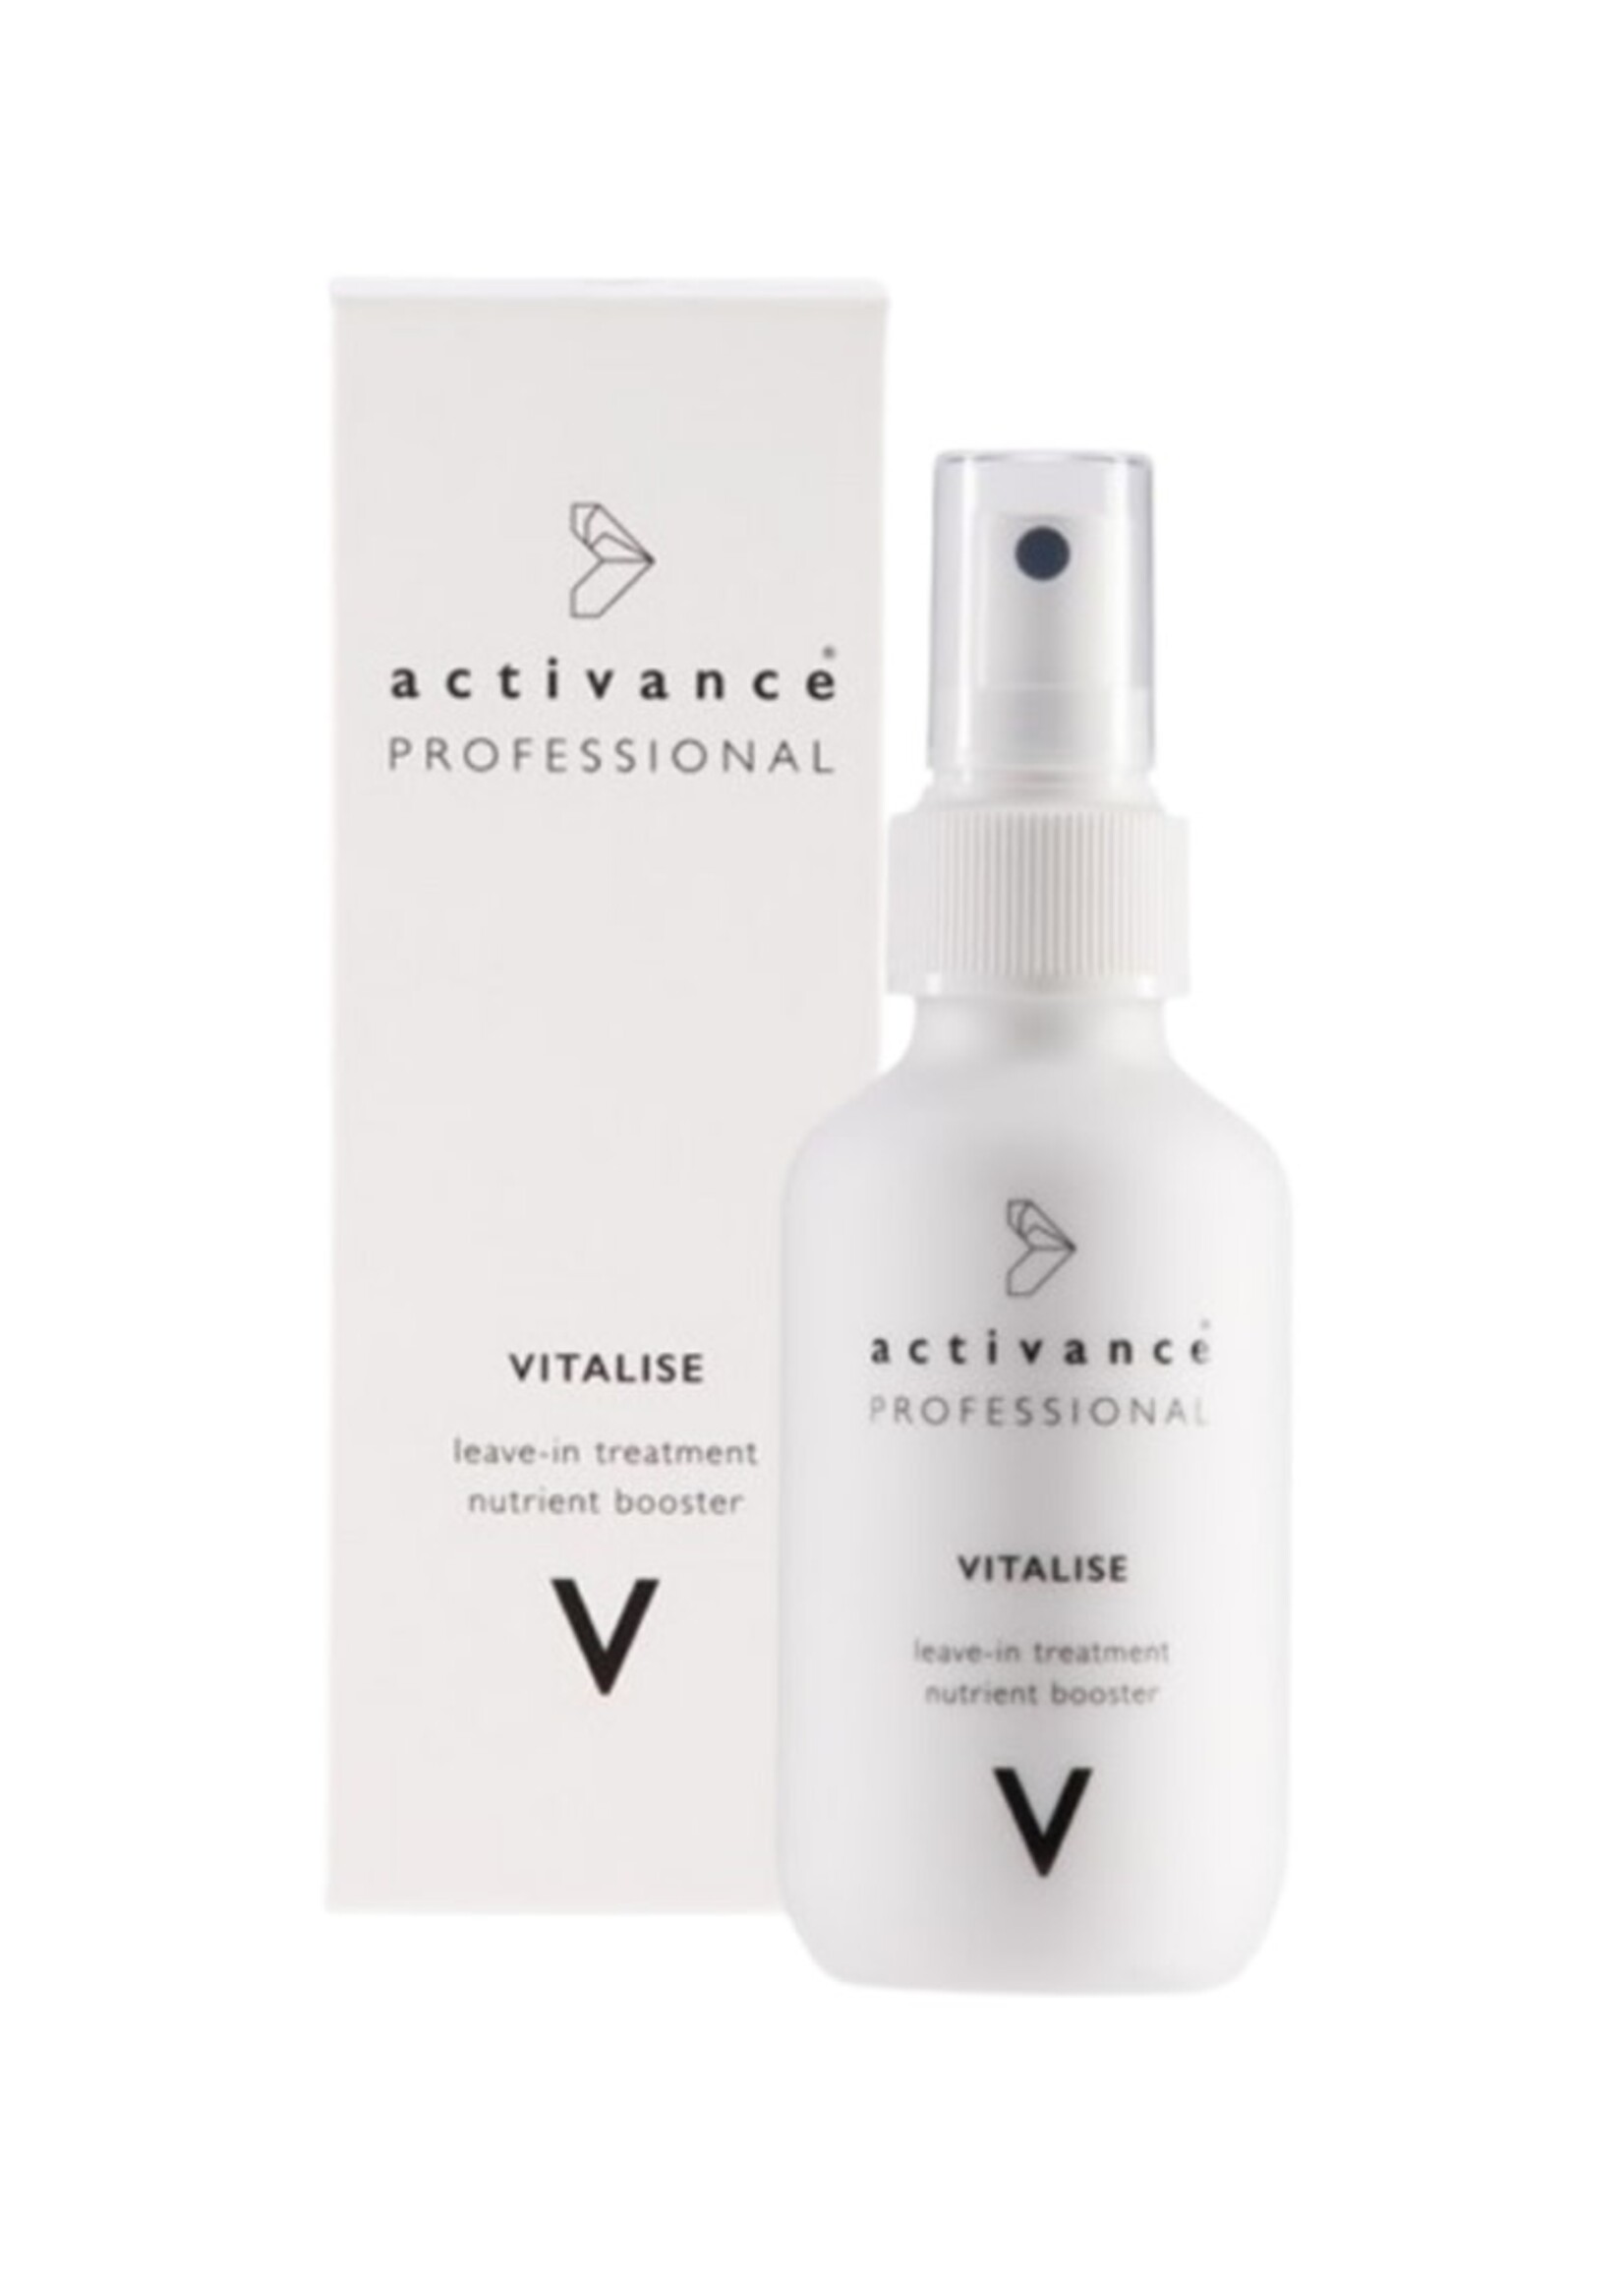 Activance Professional Activance Professional Vitalise Leave-in Treatment 100ml